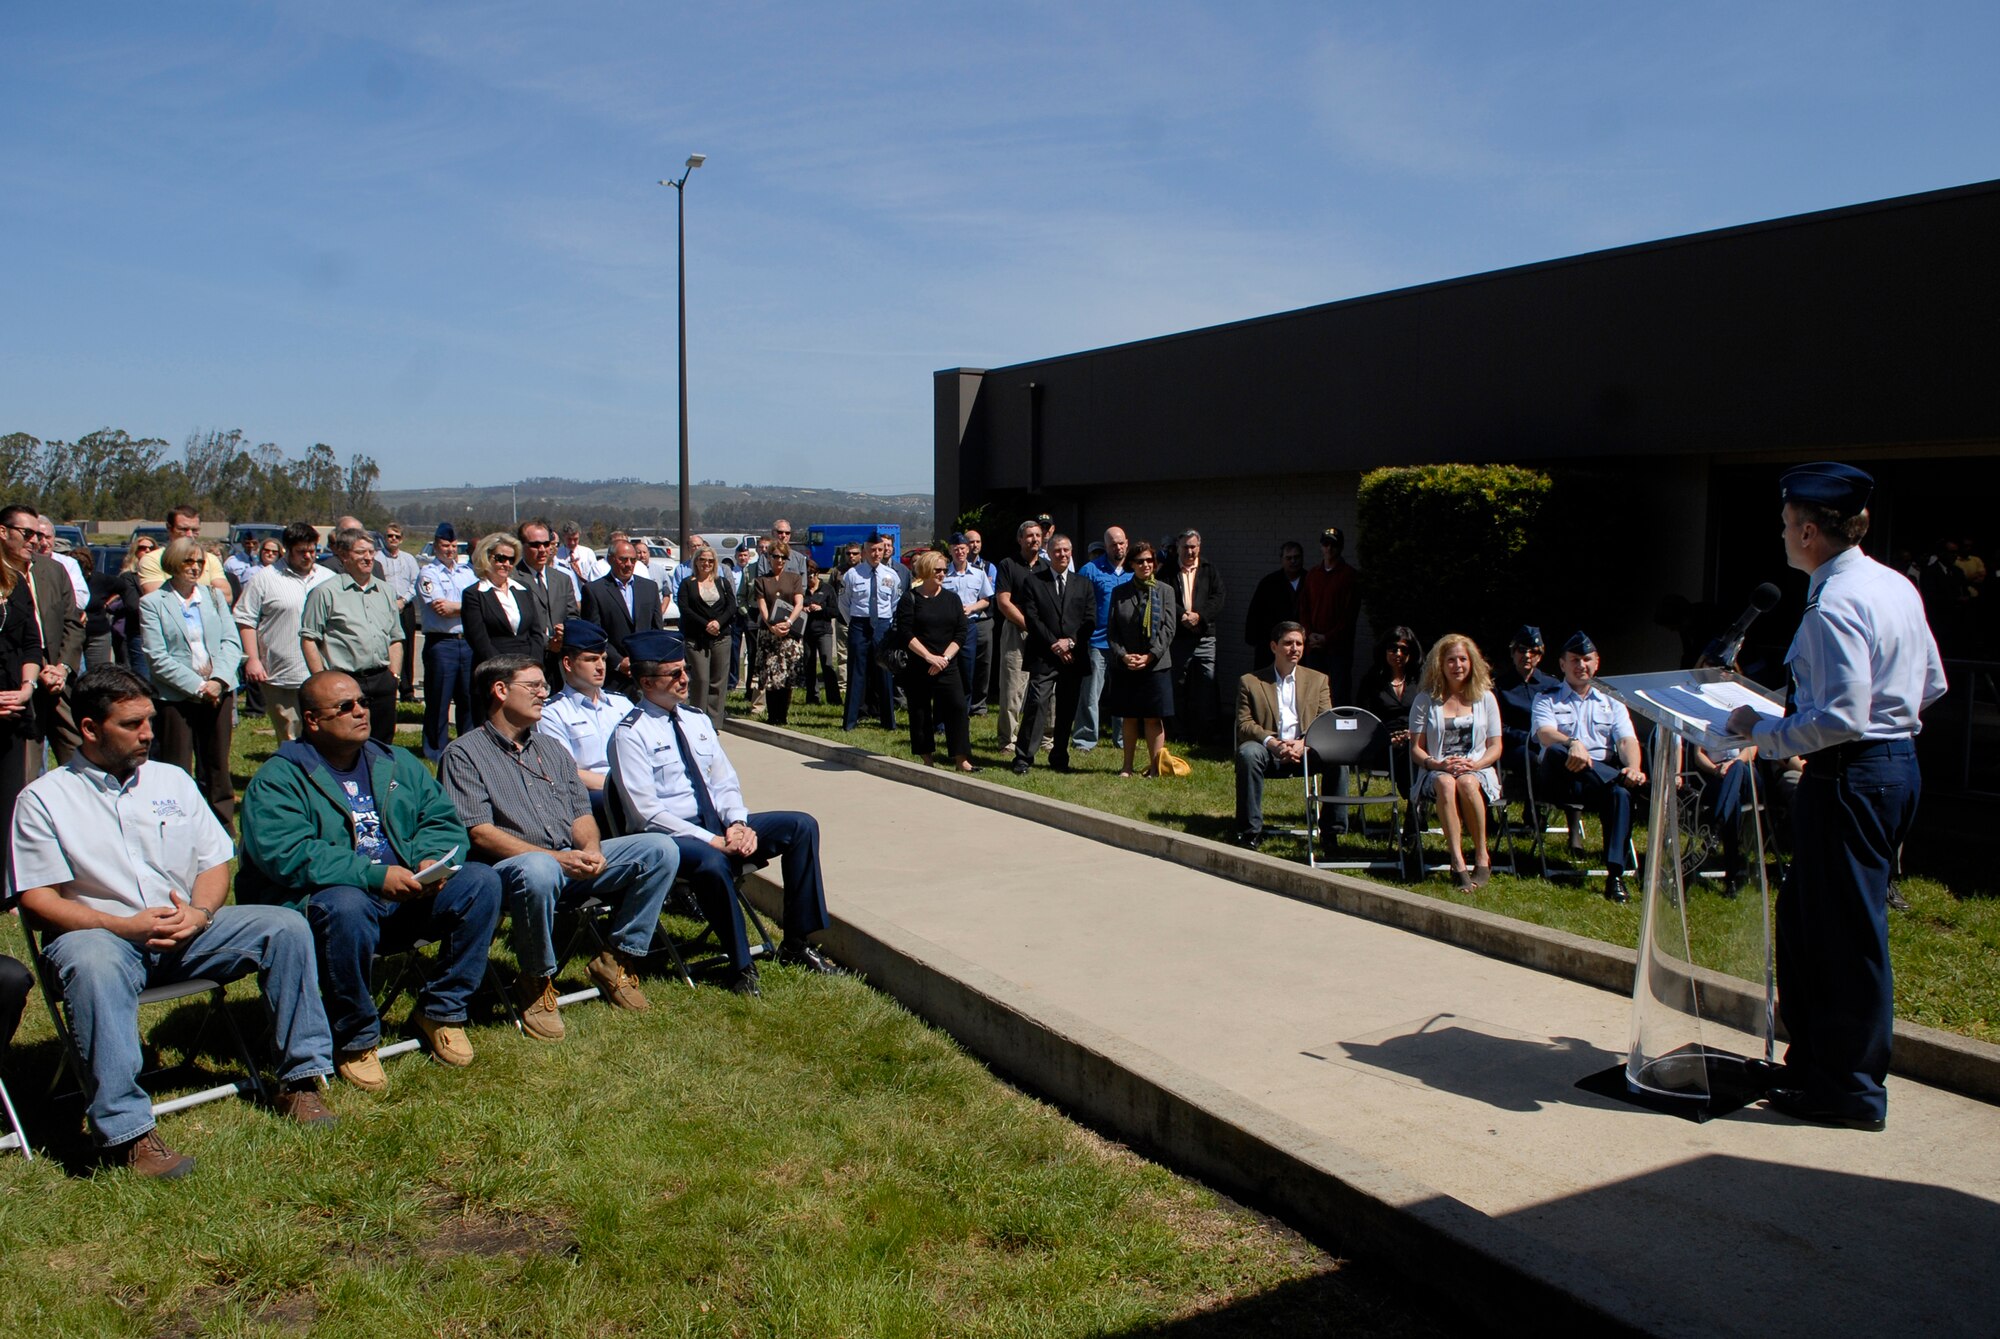 VANDENBERG AIR FORCE BASE, Calif. -- Col. David Buck, the 30th Space Wing commander, speaks at the opening of a remodeled 30th Civil Engineer Squadron facility during a ribbon cutting ceremony here Monday, March 22, 2010. (U.S. Air Force photo/Senior Airman Andrew Satran) 

 